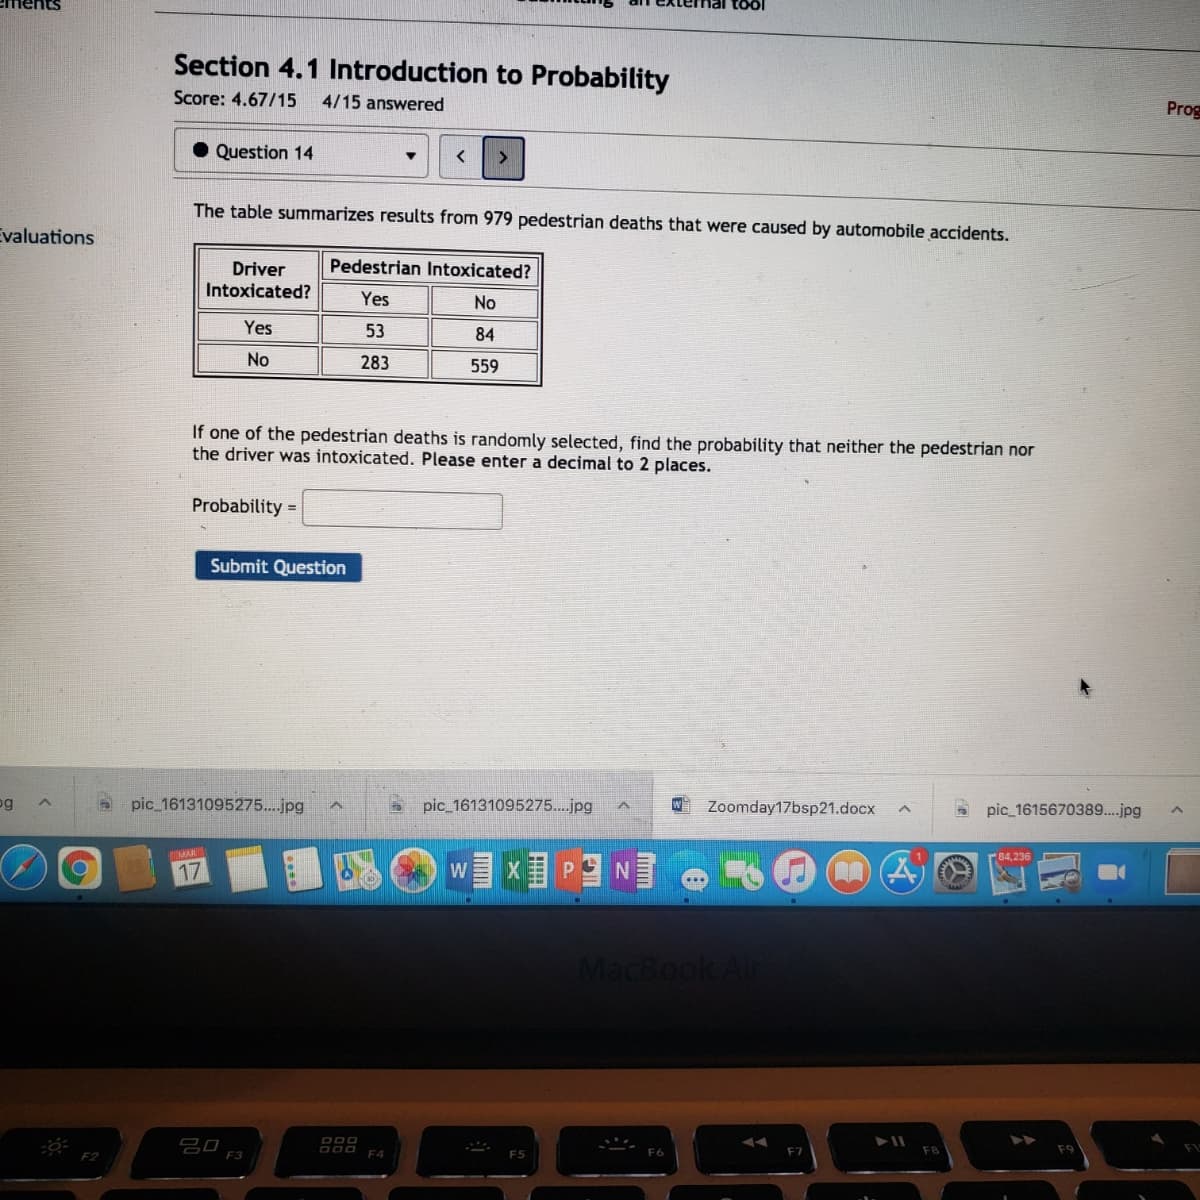 töl
Section 4.1 Introduction to Probability
Score: 4.67/15
4/15 answered
Prog
Question 14
The table summarizes results from 979 pedestrian deaths that were caused by automobile accidents.
Evaluations
Pedestrian Intoxicated?
Driver
Intoxicated?
Yes
No
Yes
53
84
No
283
559
If one of the pedestrian deaths is randomly selected, find the probability that neither the pedestrian nor
the driver was intoxicated. Please enter a decimal to 2 places.
Probability =
Submit Question
og
pic 16131095275..jpg
pic 16131095275..jpg
Zoomday17bsp21.docx
pic 1615670389..jpg
17
MacBook Air
吕0
F3
F7
F2
